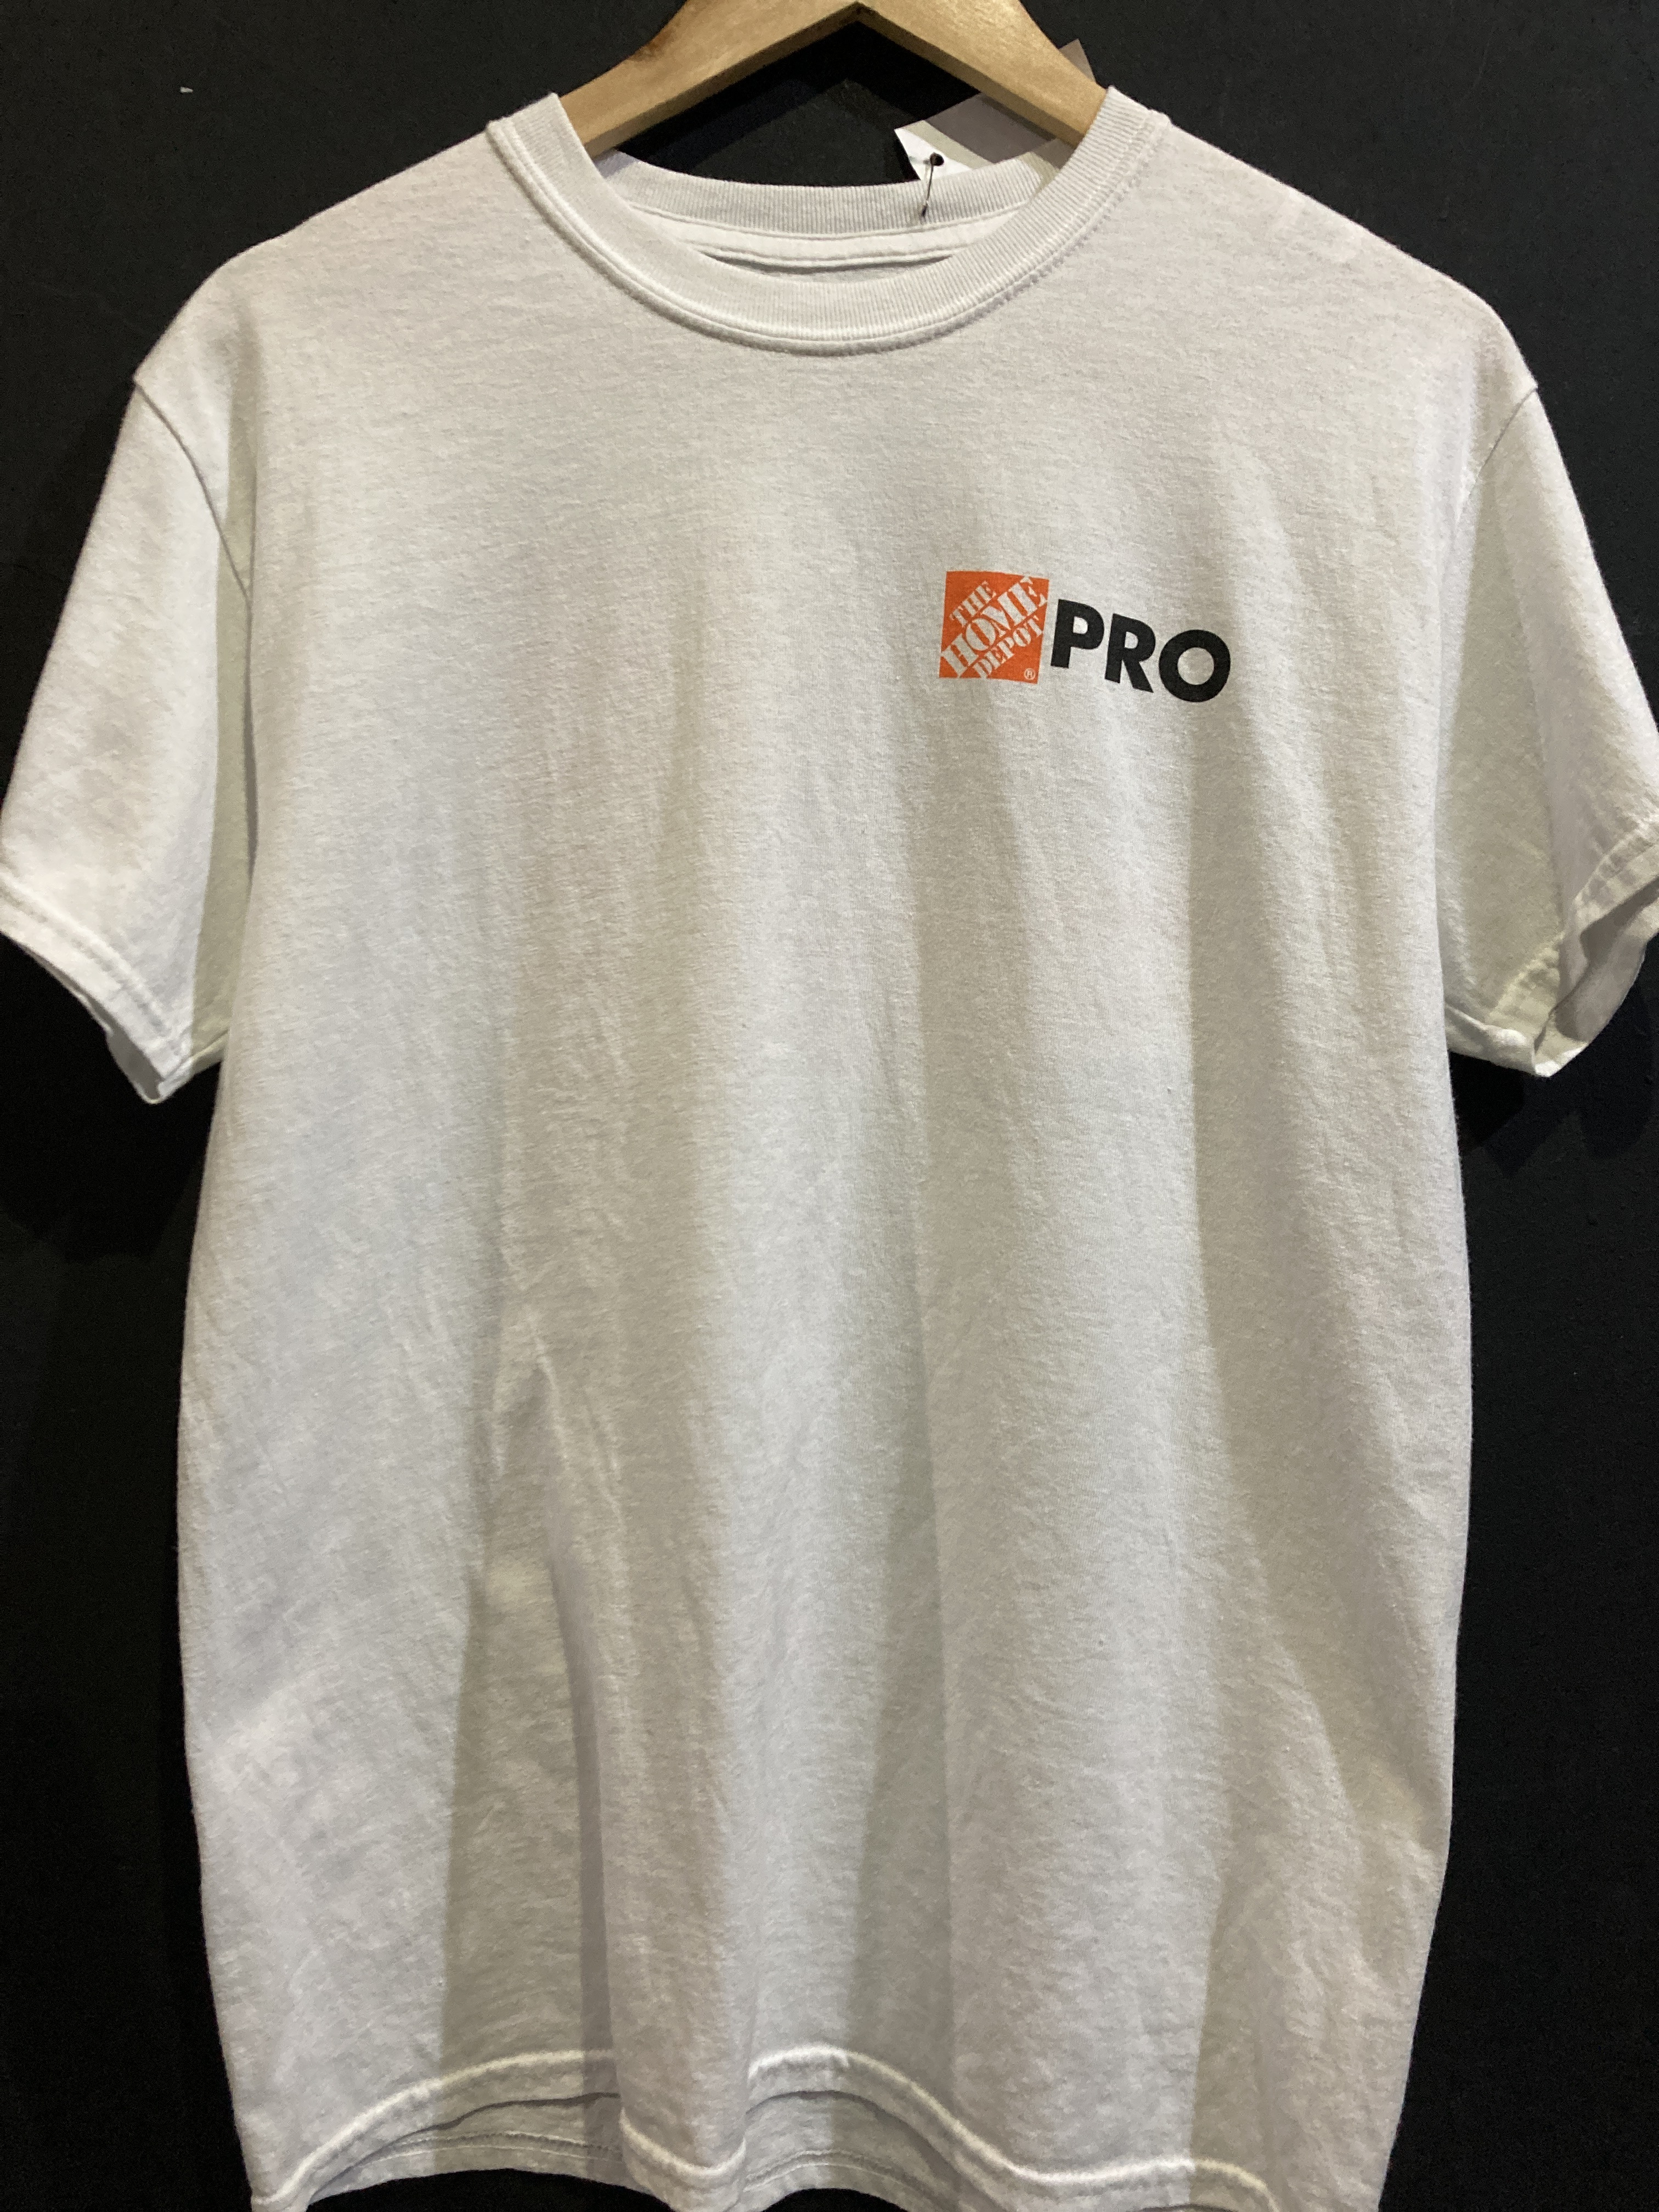 THE HOME DEPOT PRO 企業 Tシャツ ギルダン | Vintage.City